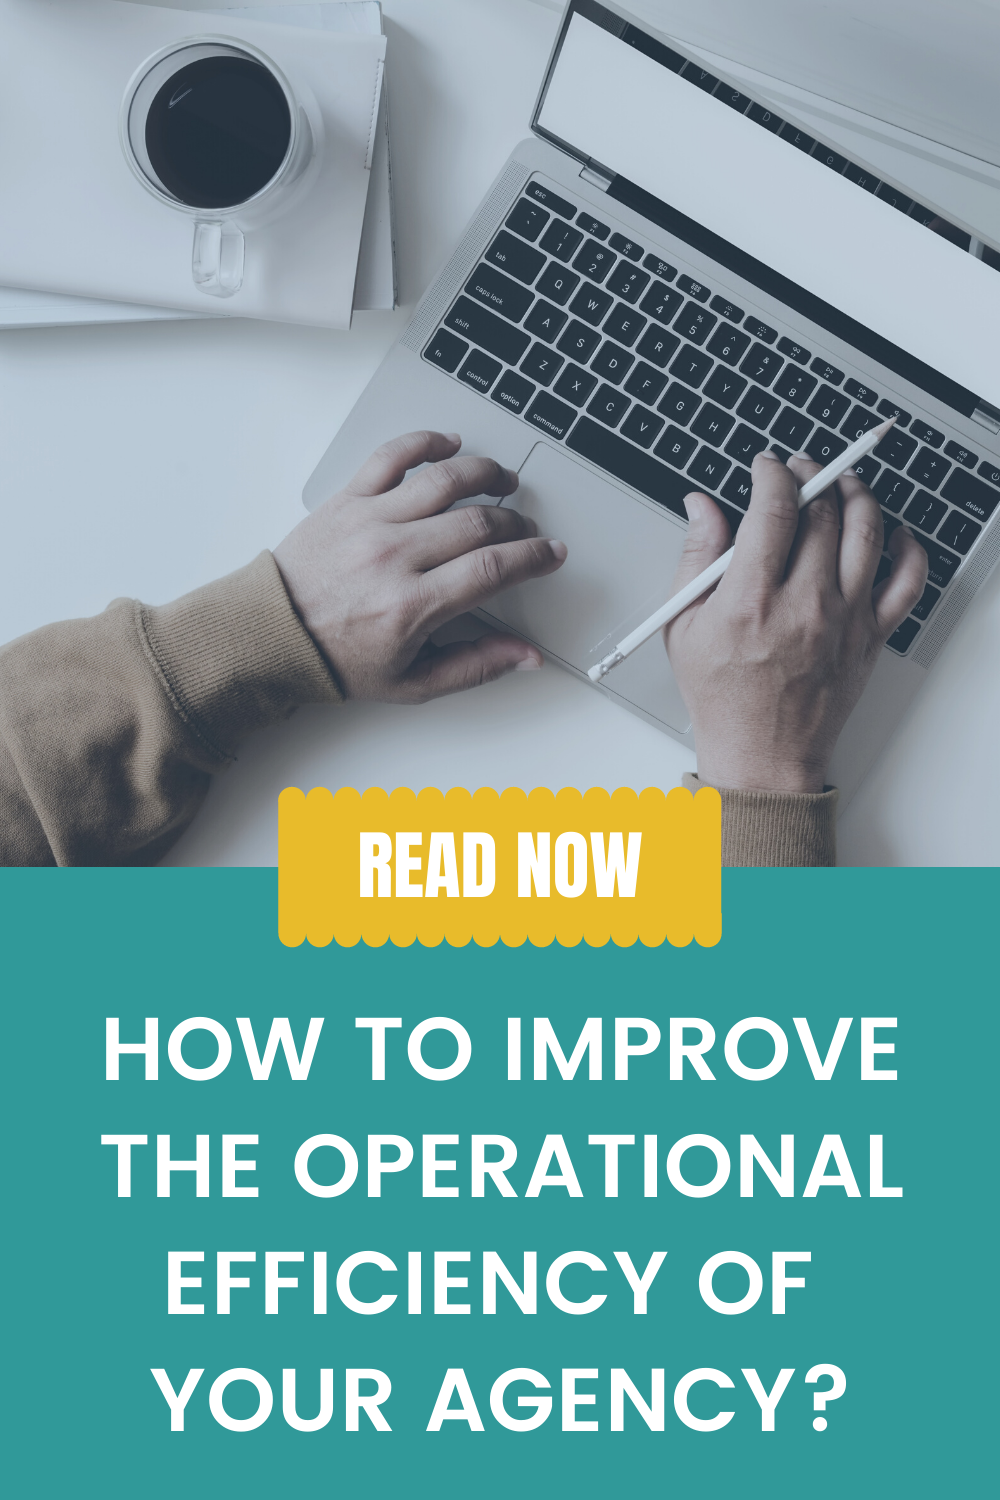 How to improve the operational efficiency of your agency